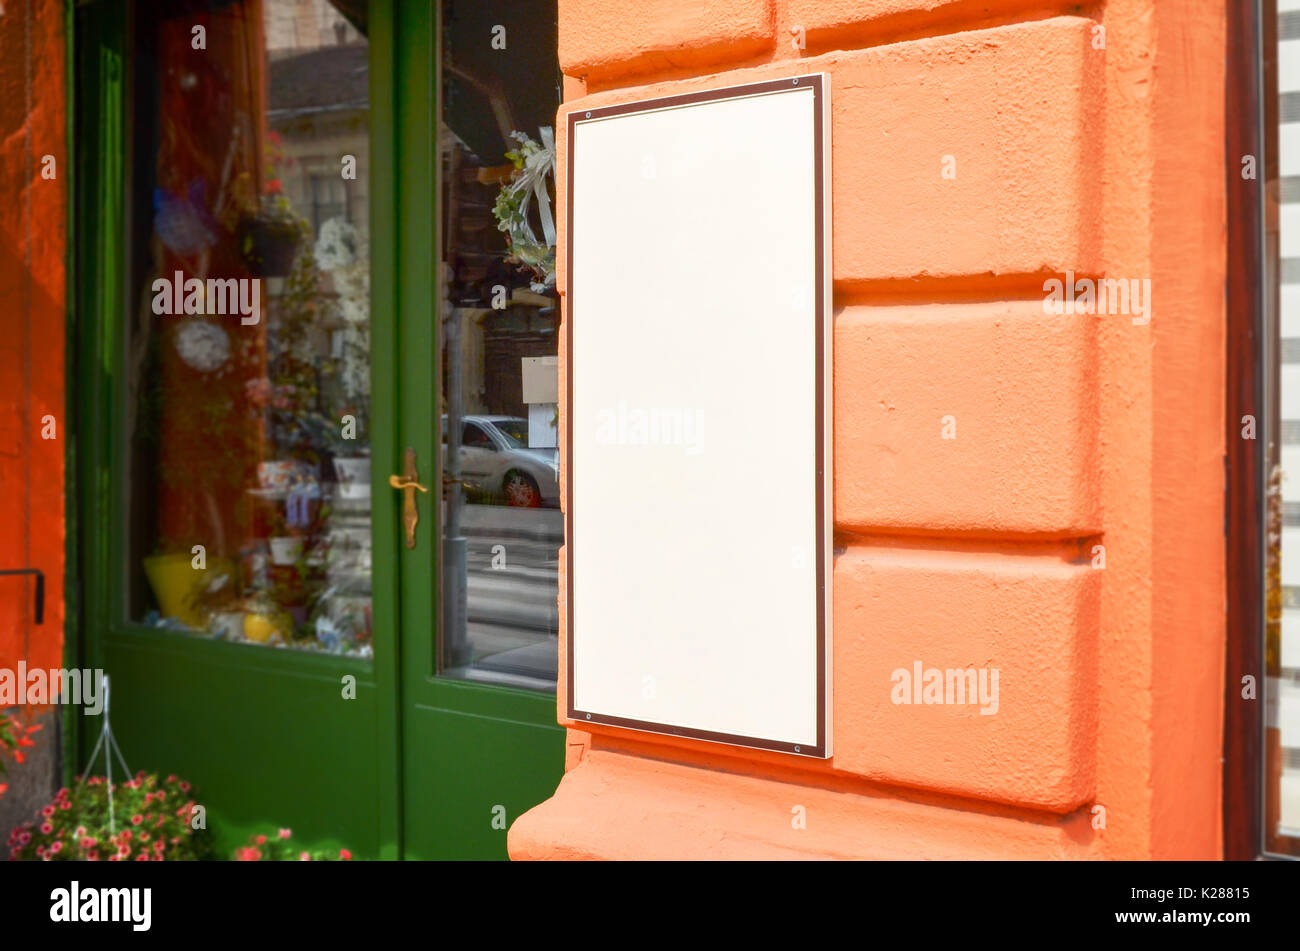 Signboard view of empty white mockup signage in frame with orange shop wall in background Stock Photo